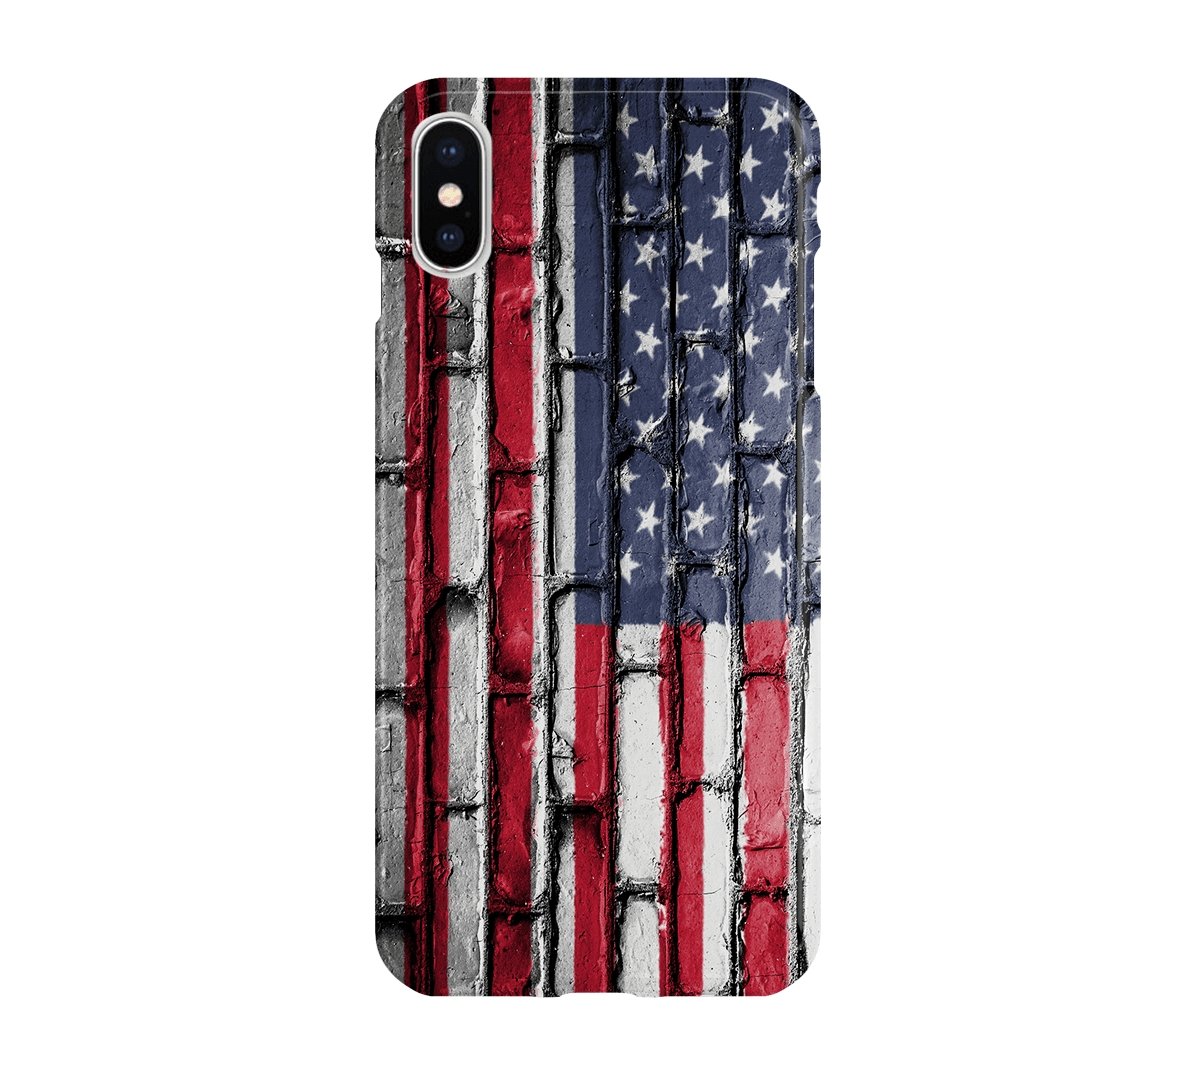 Patriotic Bricks - iPhone phone case designs by CaseSwagger